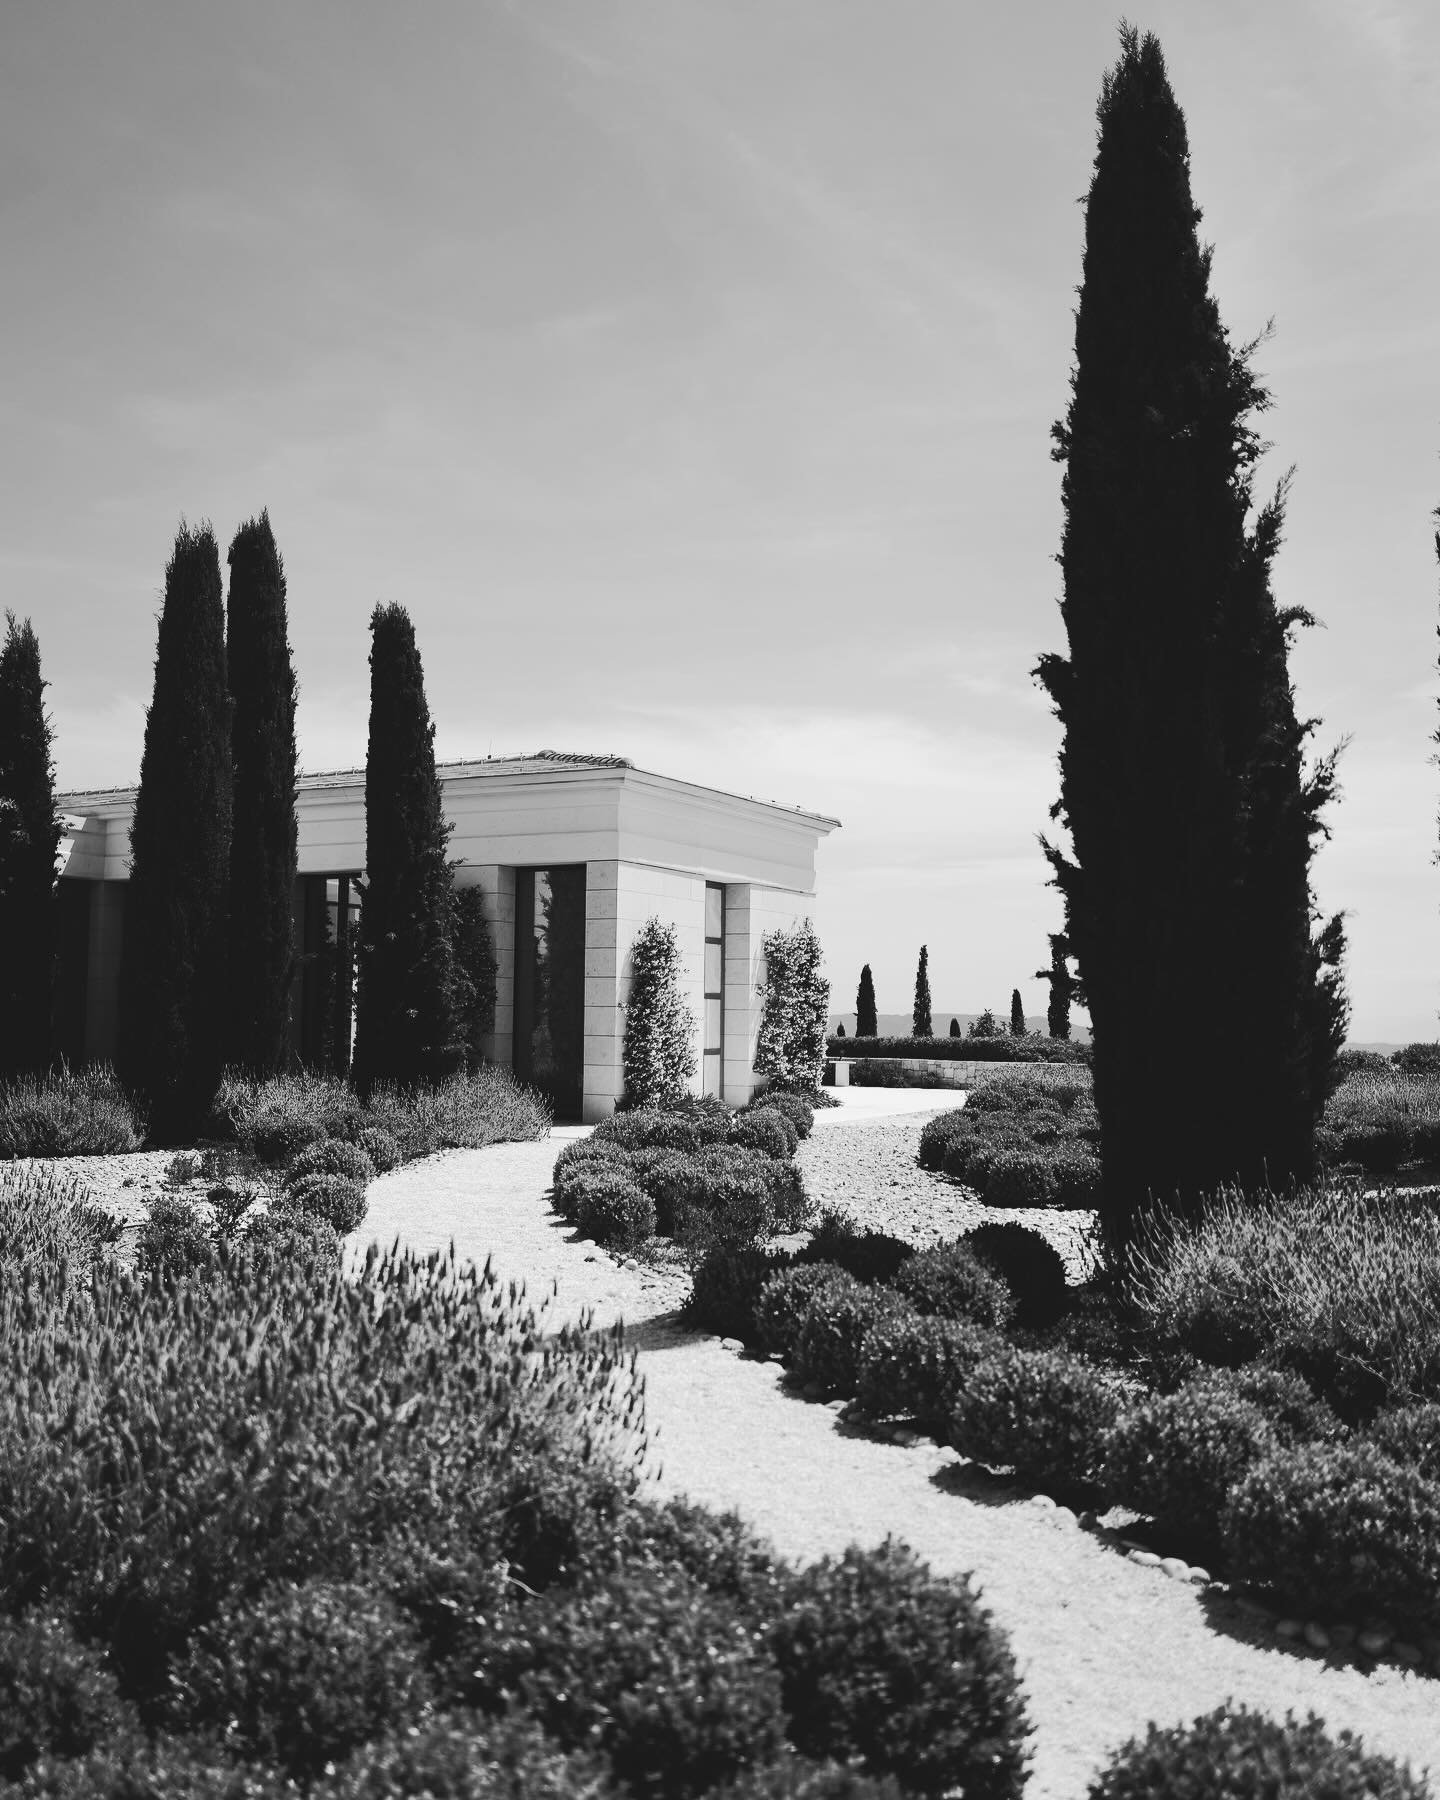 One of the most astonishing property in Greece!

@amanzoe from @aman resorts - where ancient healing traditions take on a modern sensibility. A deep love and respect for the astonishing gifts of the natural world

Surrounded by olive groves with pano